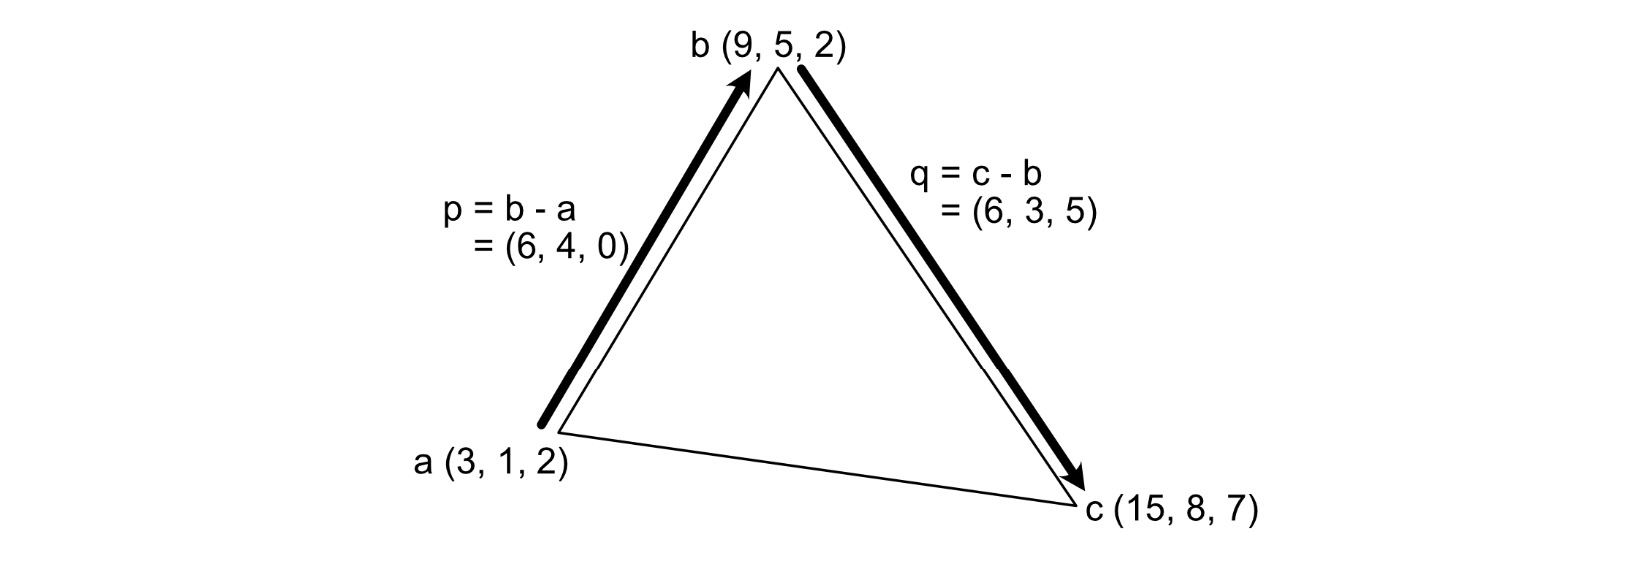 Figure 10.10: Calculating the vectors on a triangle
